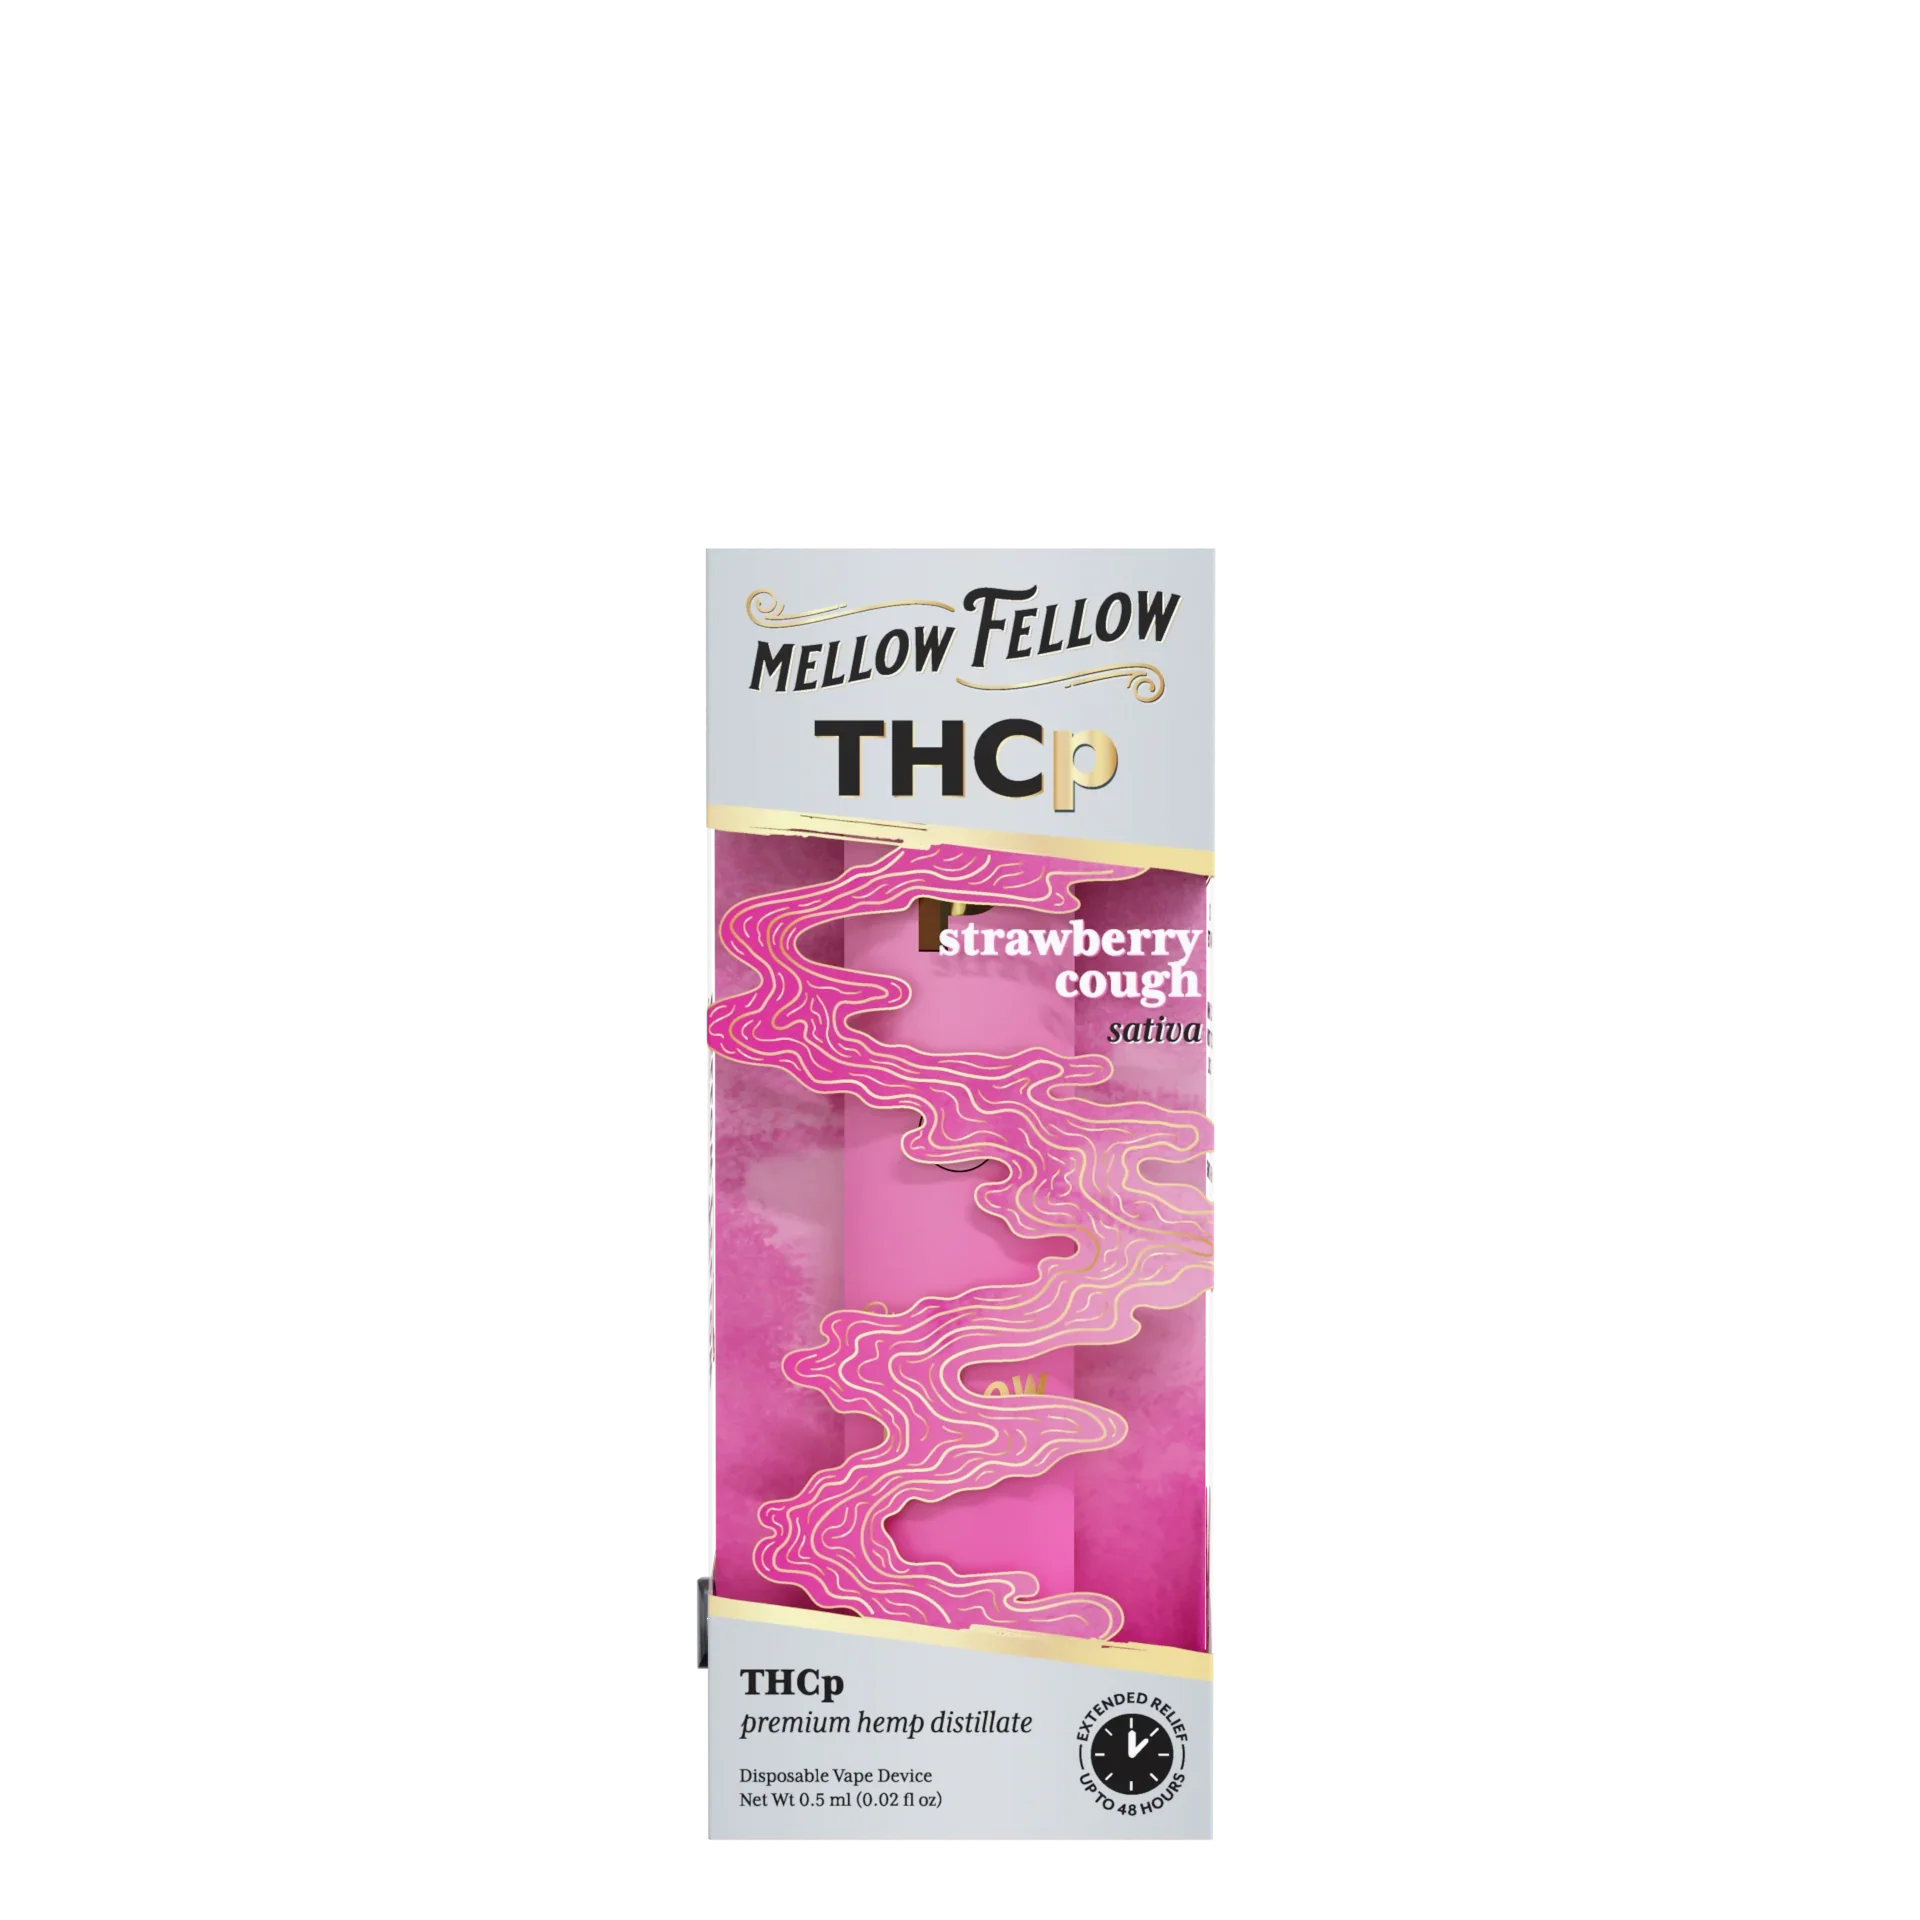 Mellow Fellow THCp 0.5g Disposable Vape - Strawberry Cough (Sativa) Best Price